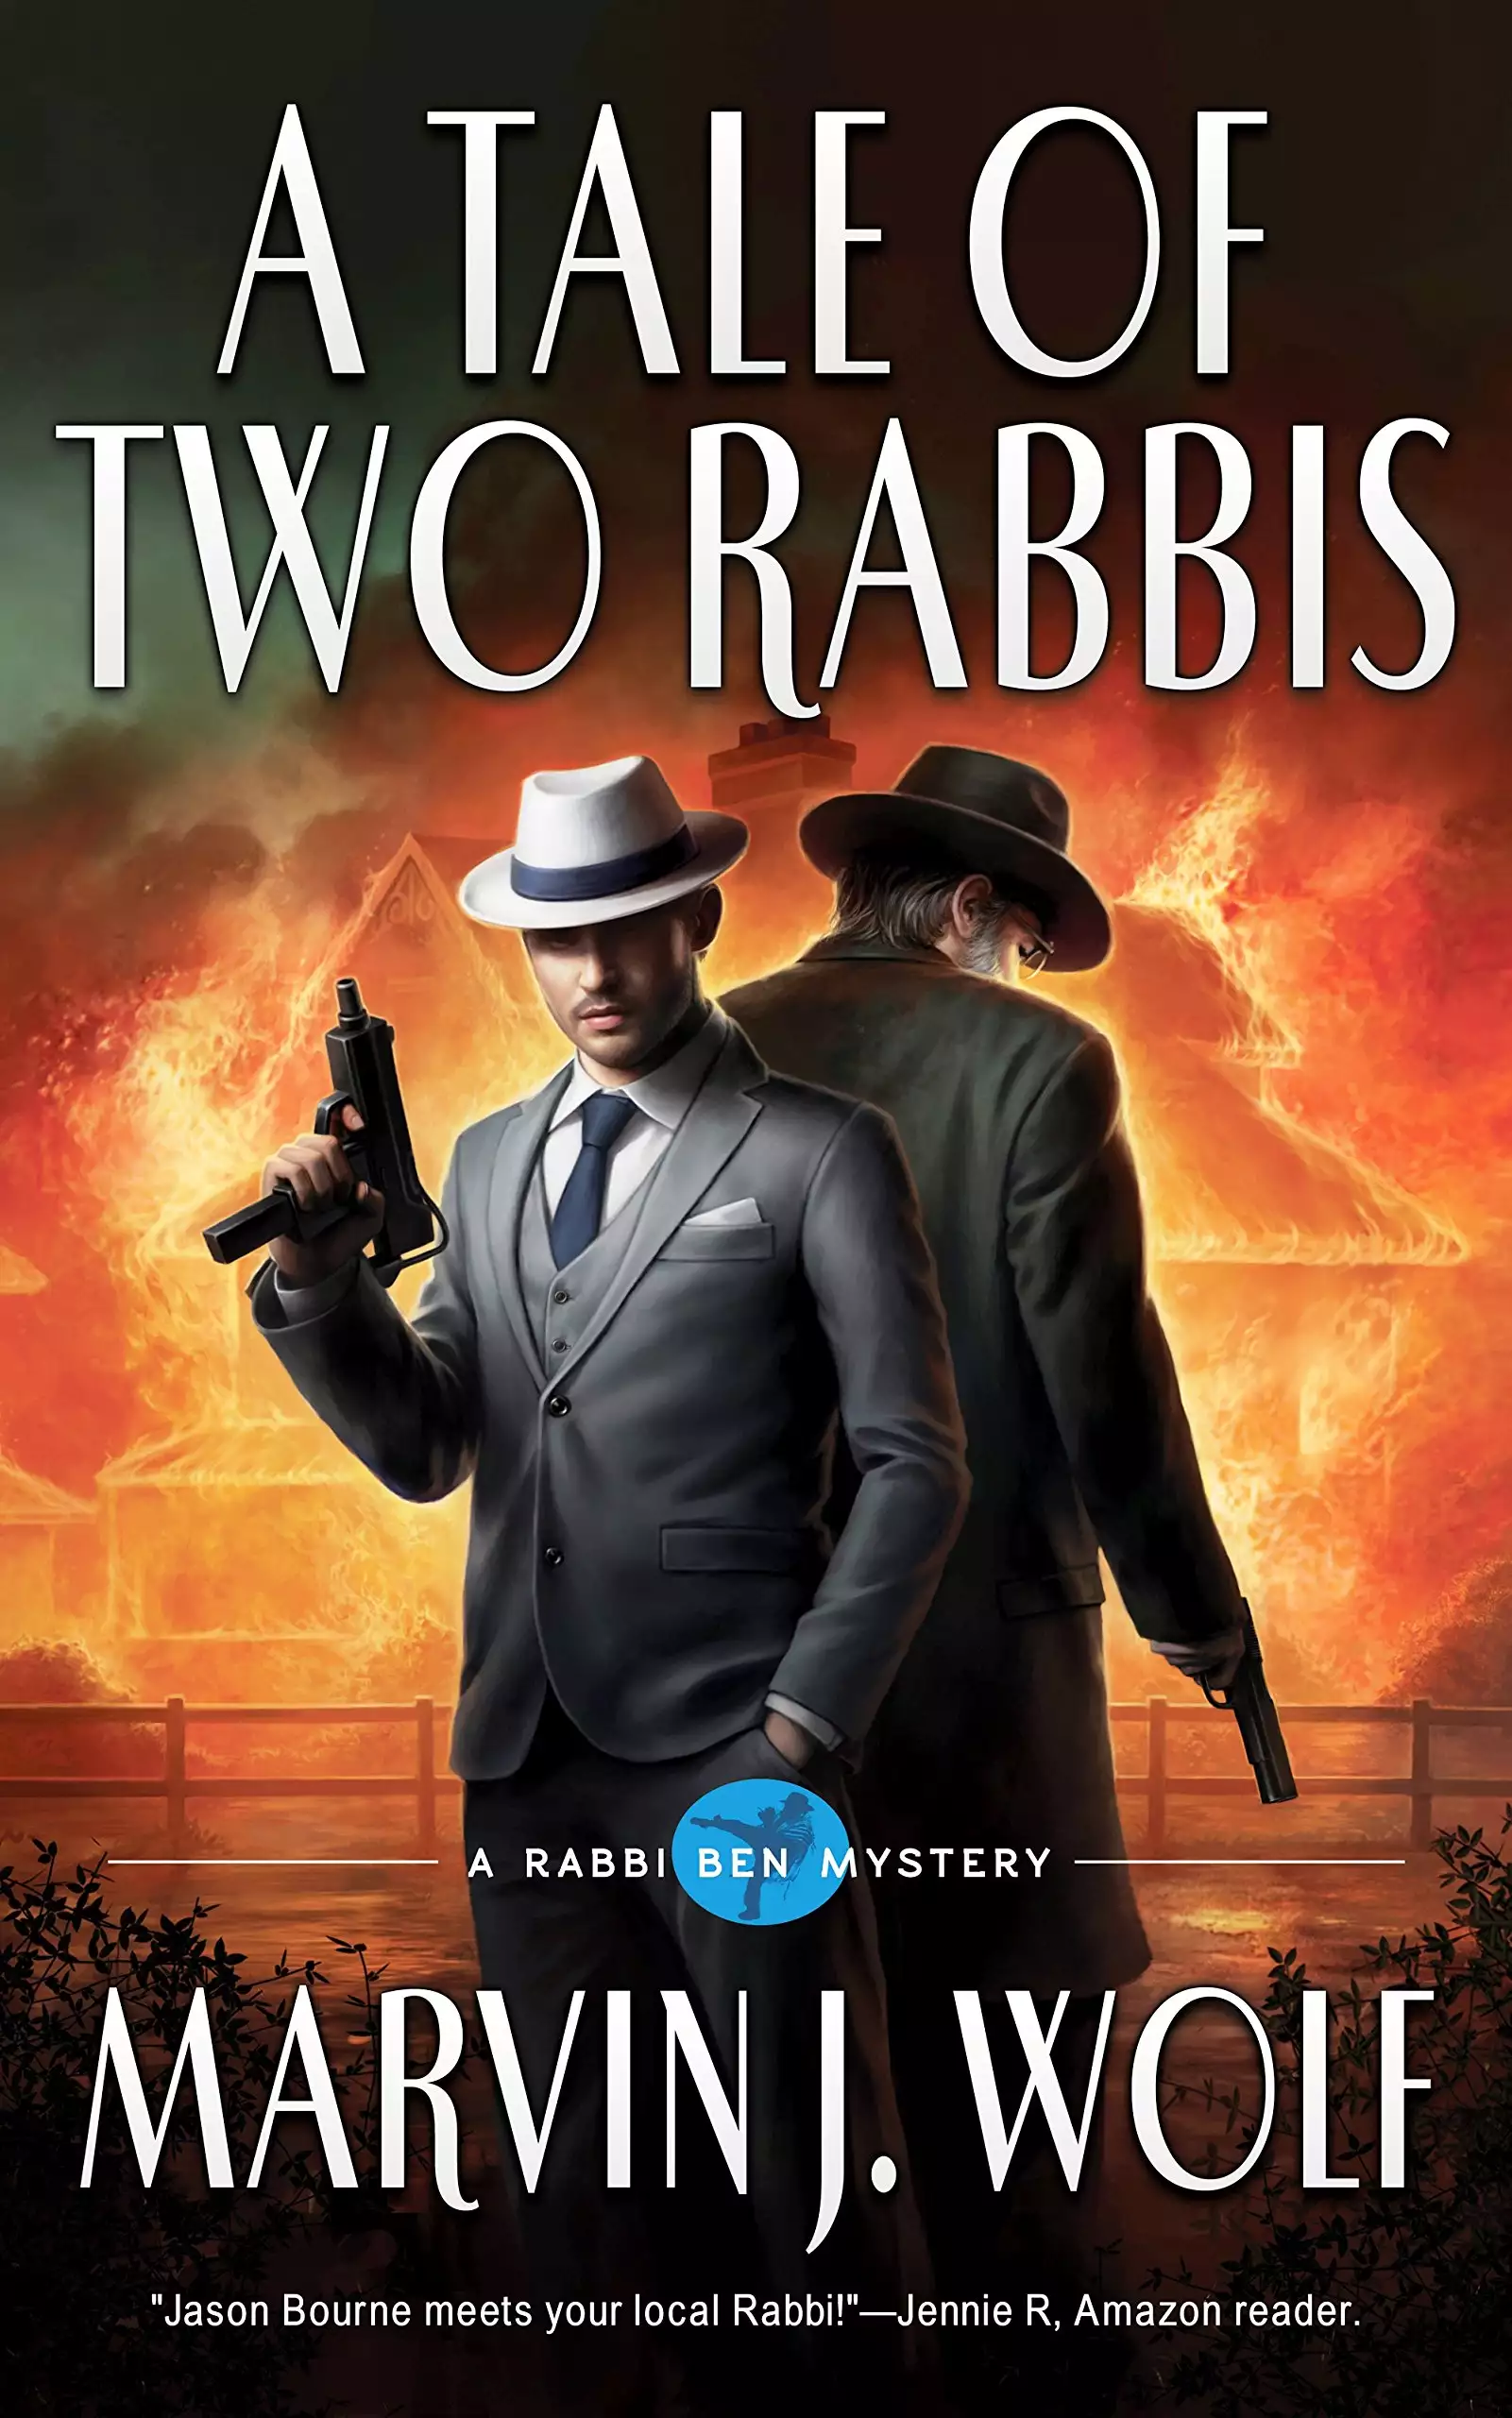 A Tale of Two Rabbis